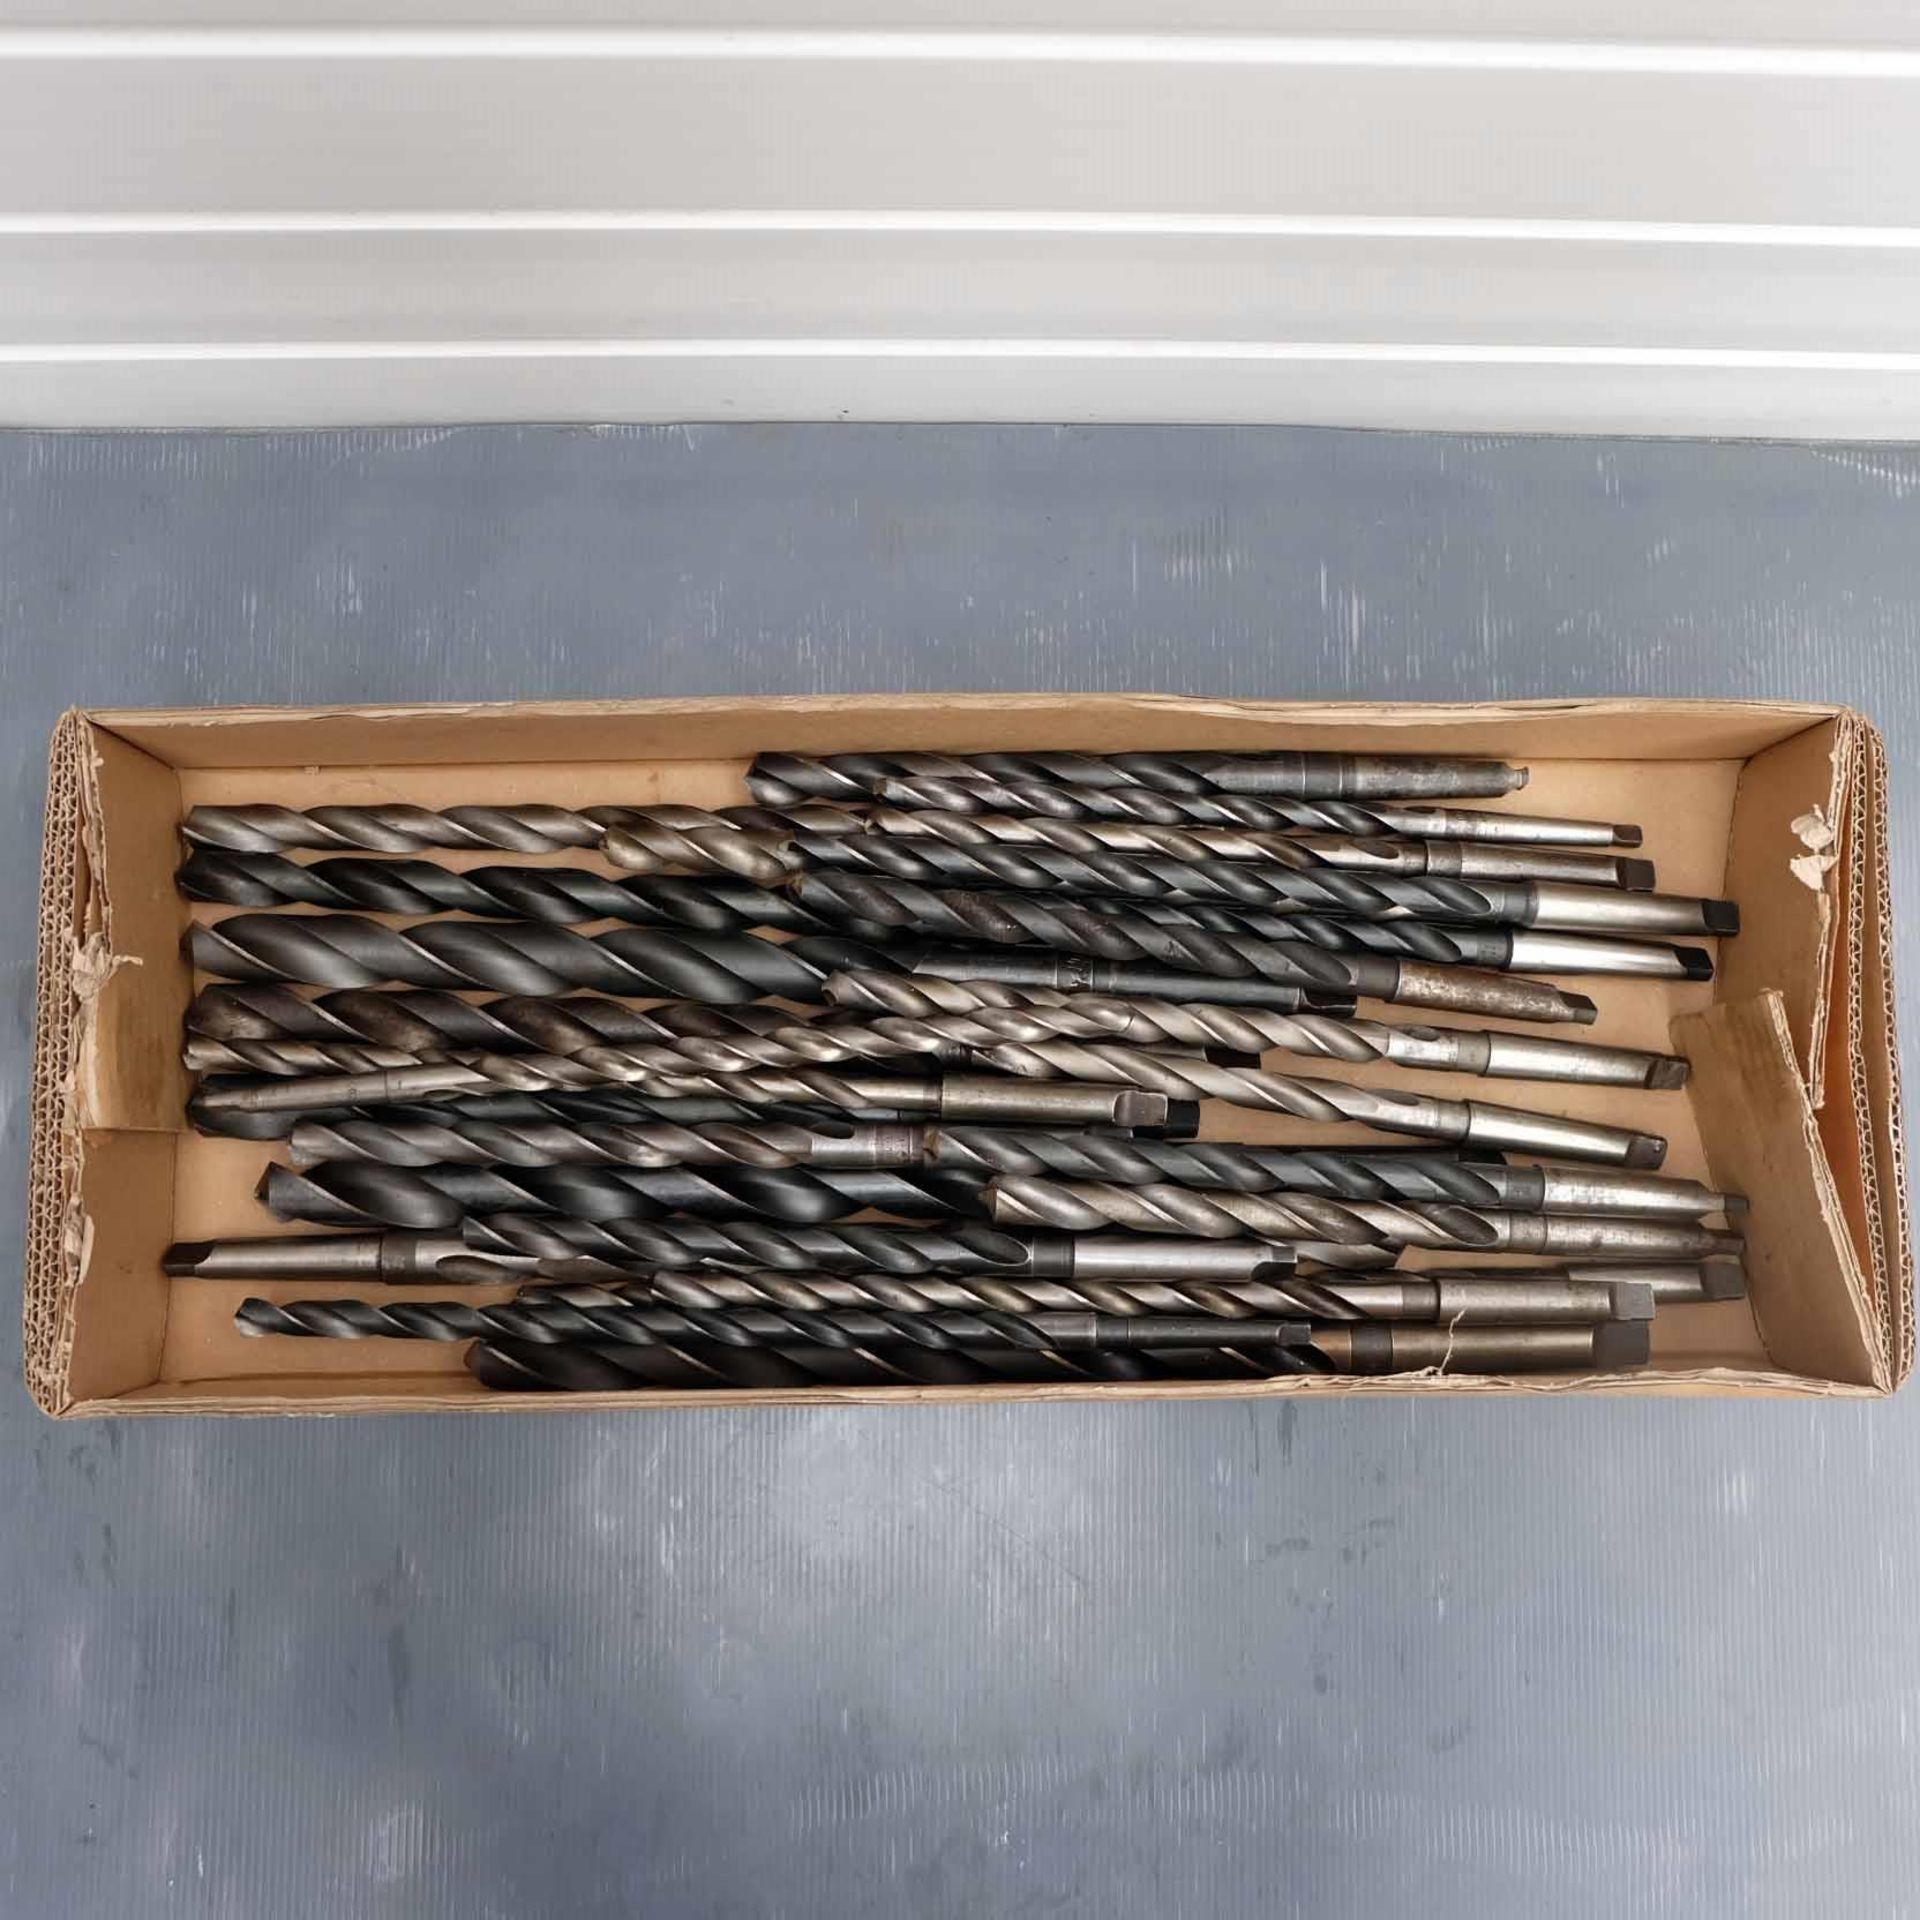 Quantity of Long Series Twist Drills. Various Imperial Sizes. 1 - 3 MT.